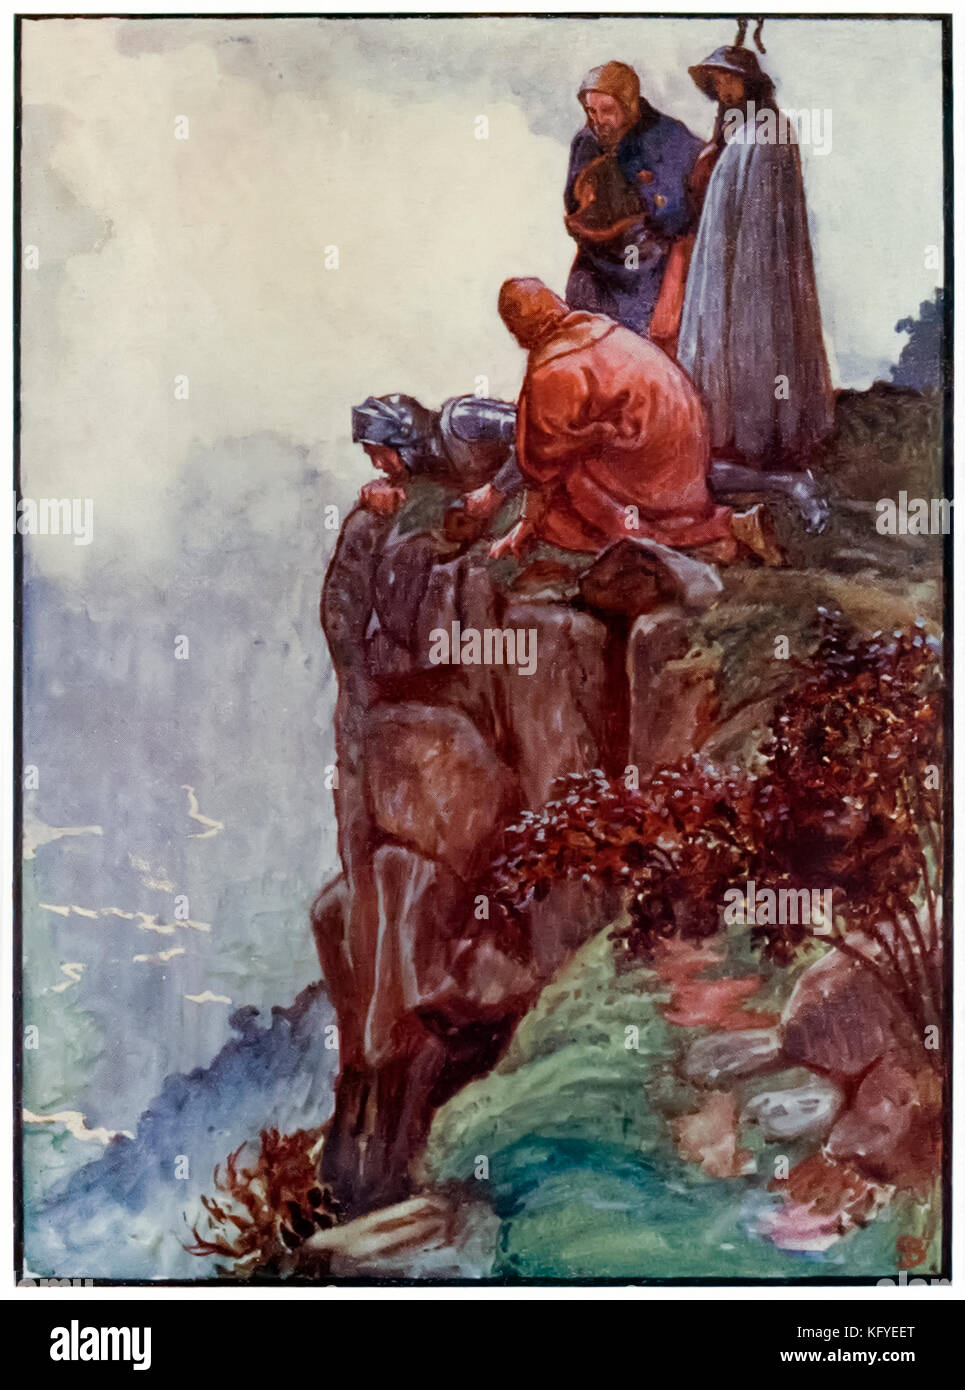 “Hill Error” from ‘The Pilgrim’s Progress From This World, To That Which Is To Come’ by John Bunyan (1628-1688). Illustration by Byam Shaw (1872-1919). The Shepherds Experience, Knowledge, Watchful, and in the Delectable Mountains. See more information below. Stock Photo